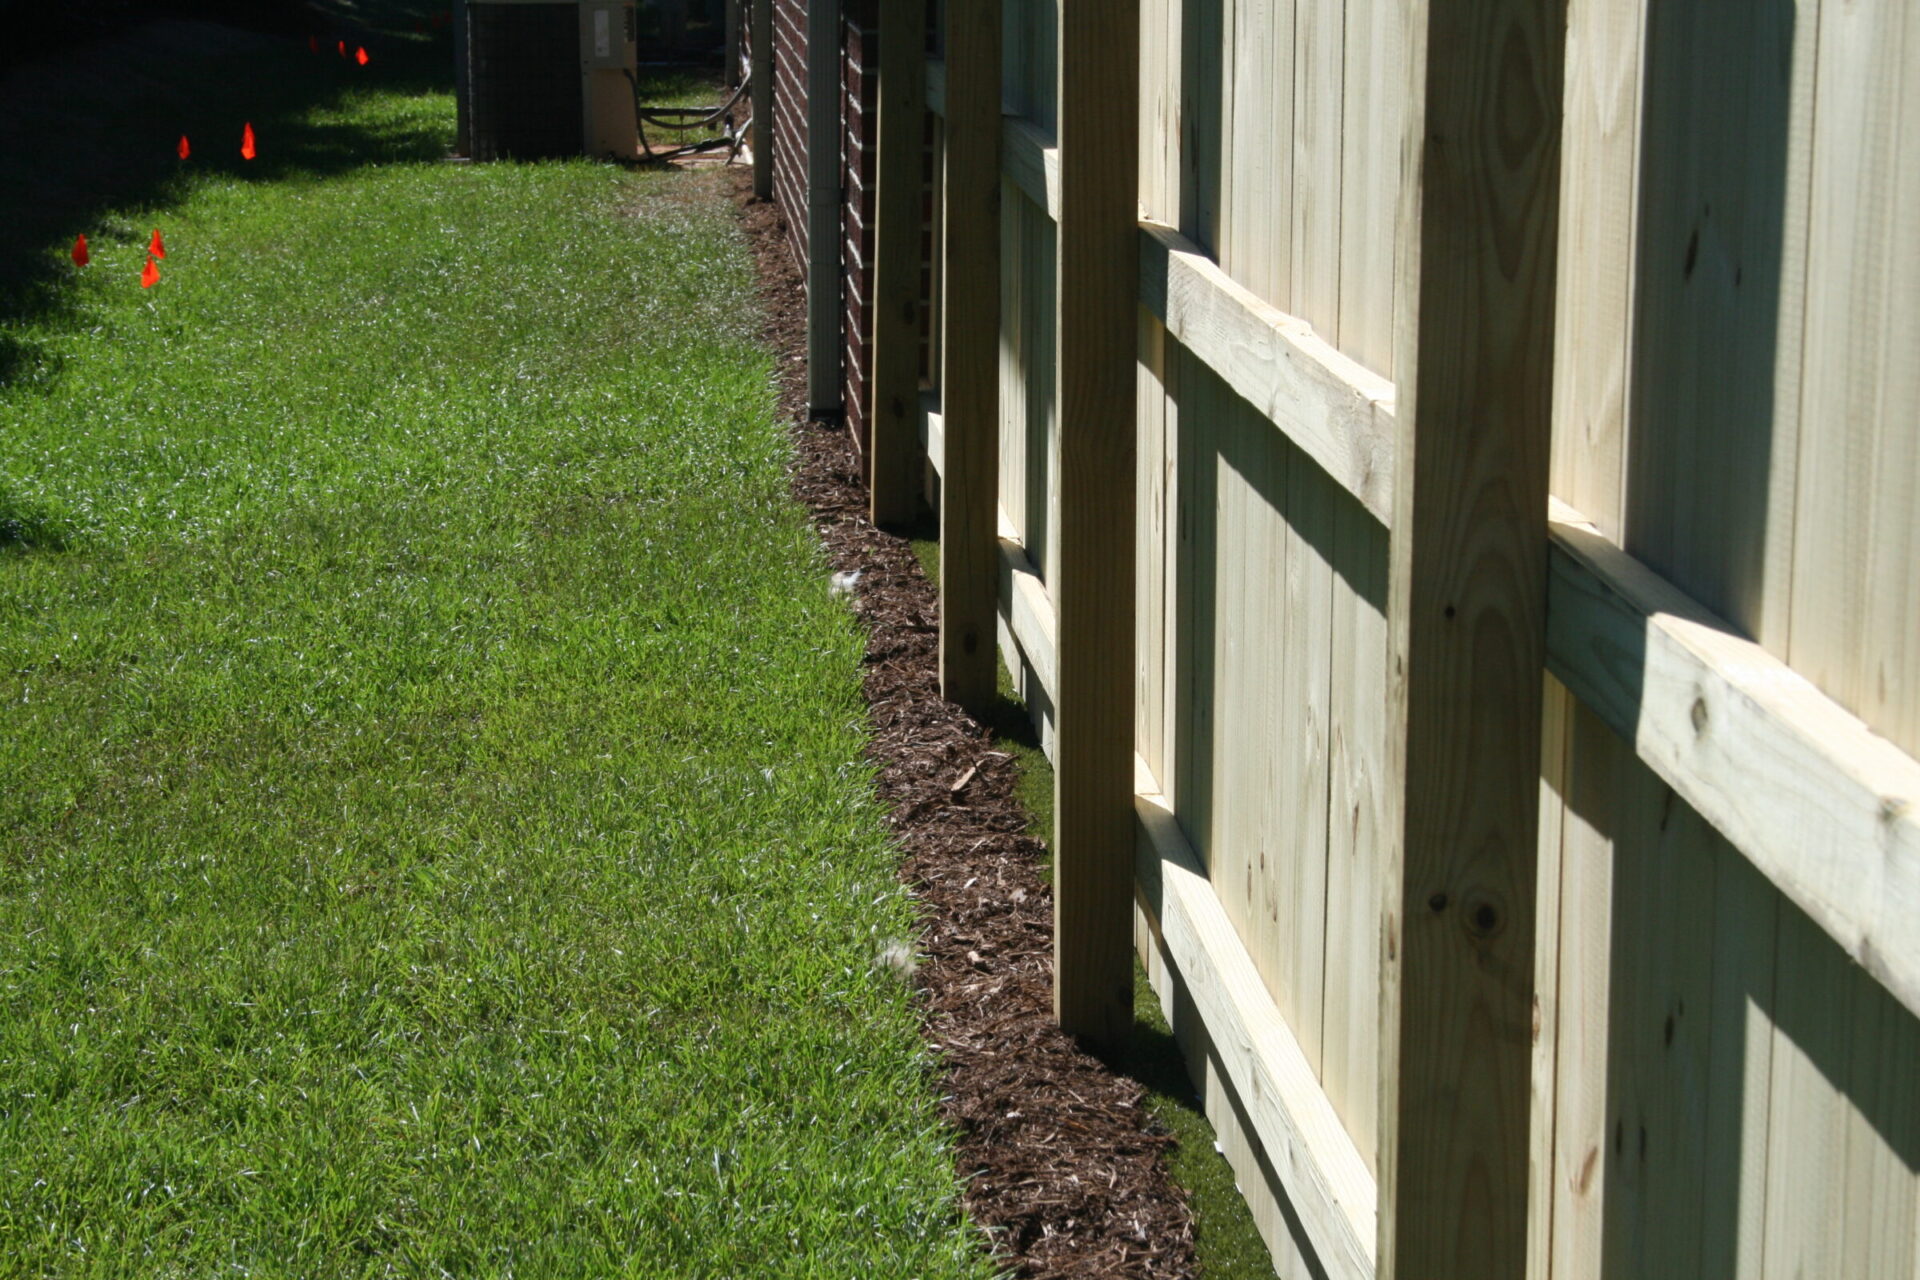 This image shows a neatly manicured grass lawn beside a wooden plank fence, with a line of mulch along the fence's base, in sunny daylight.